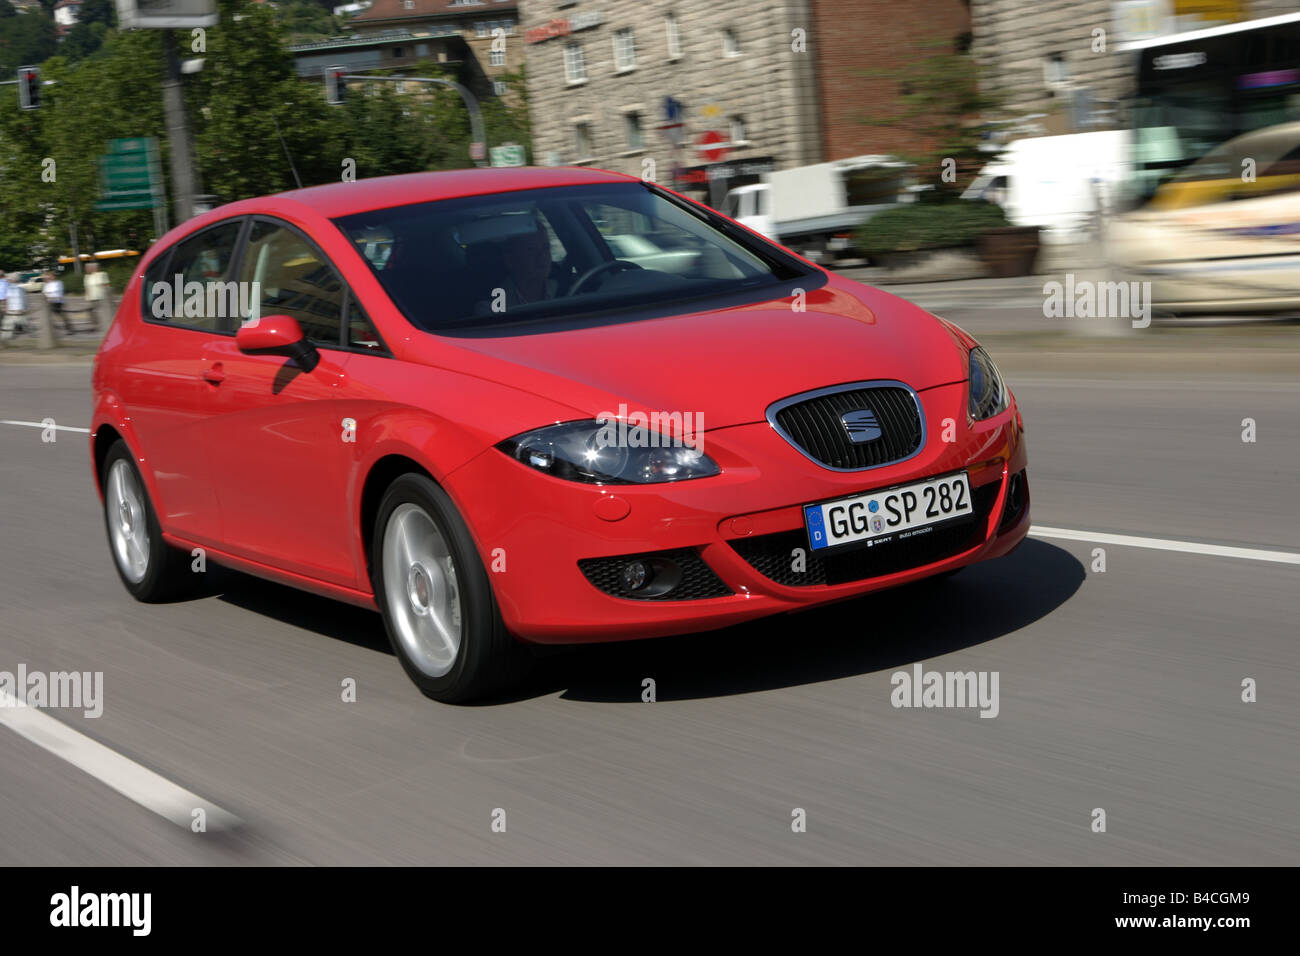 Seat Leon 2.0 FSI, model year 2005-, red, driving, diagonal from the front, frontal view, City Stock Photo